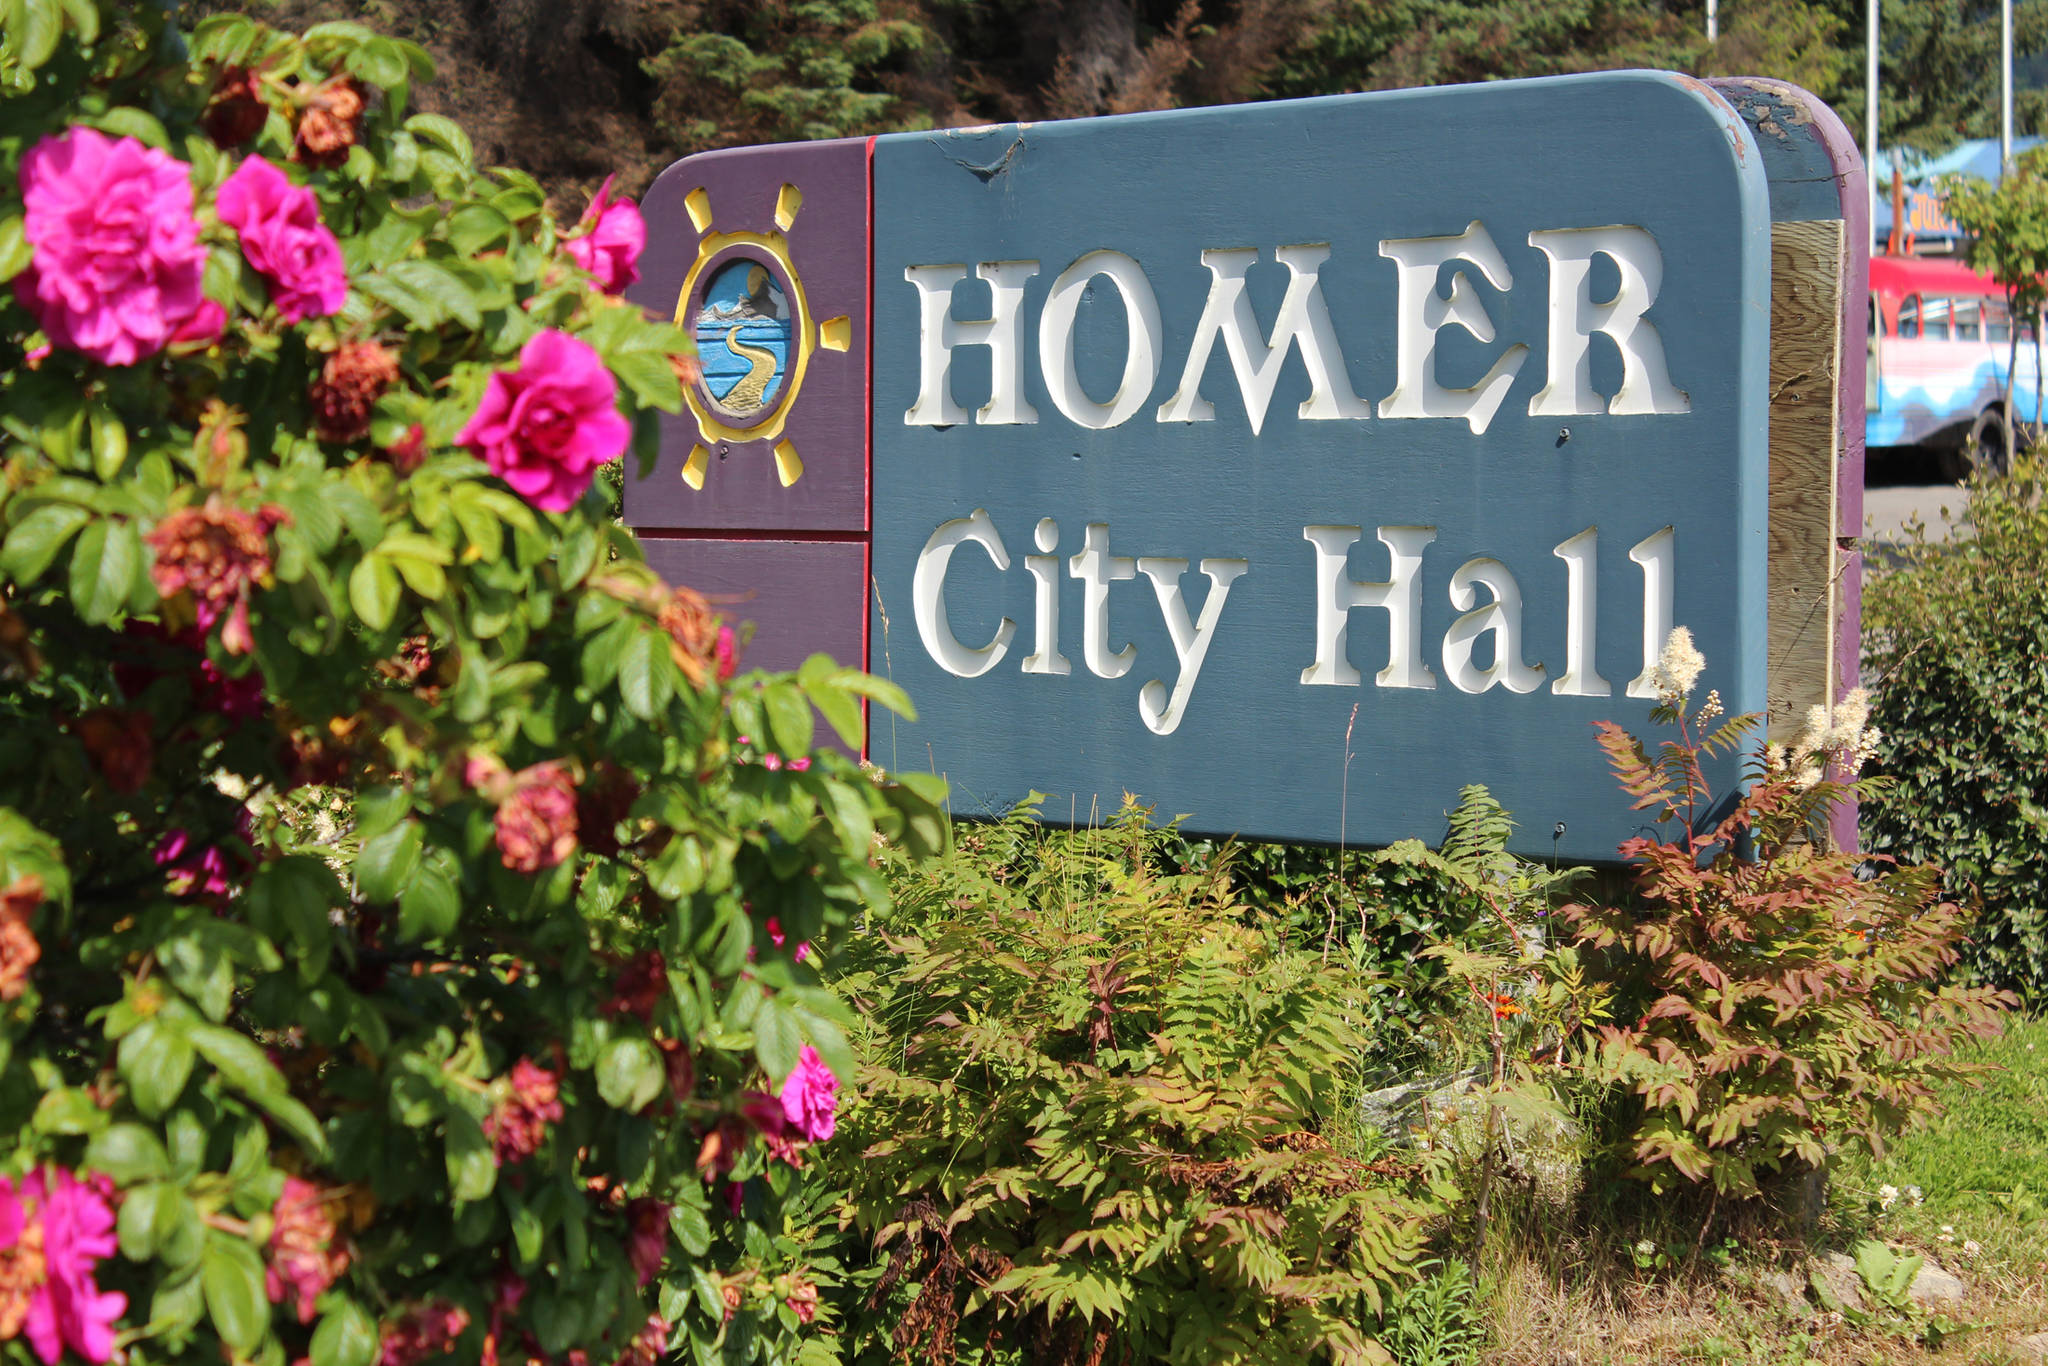 City mulls funding for faith-based program that could bring addiction treatment center to Homer